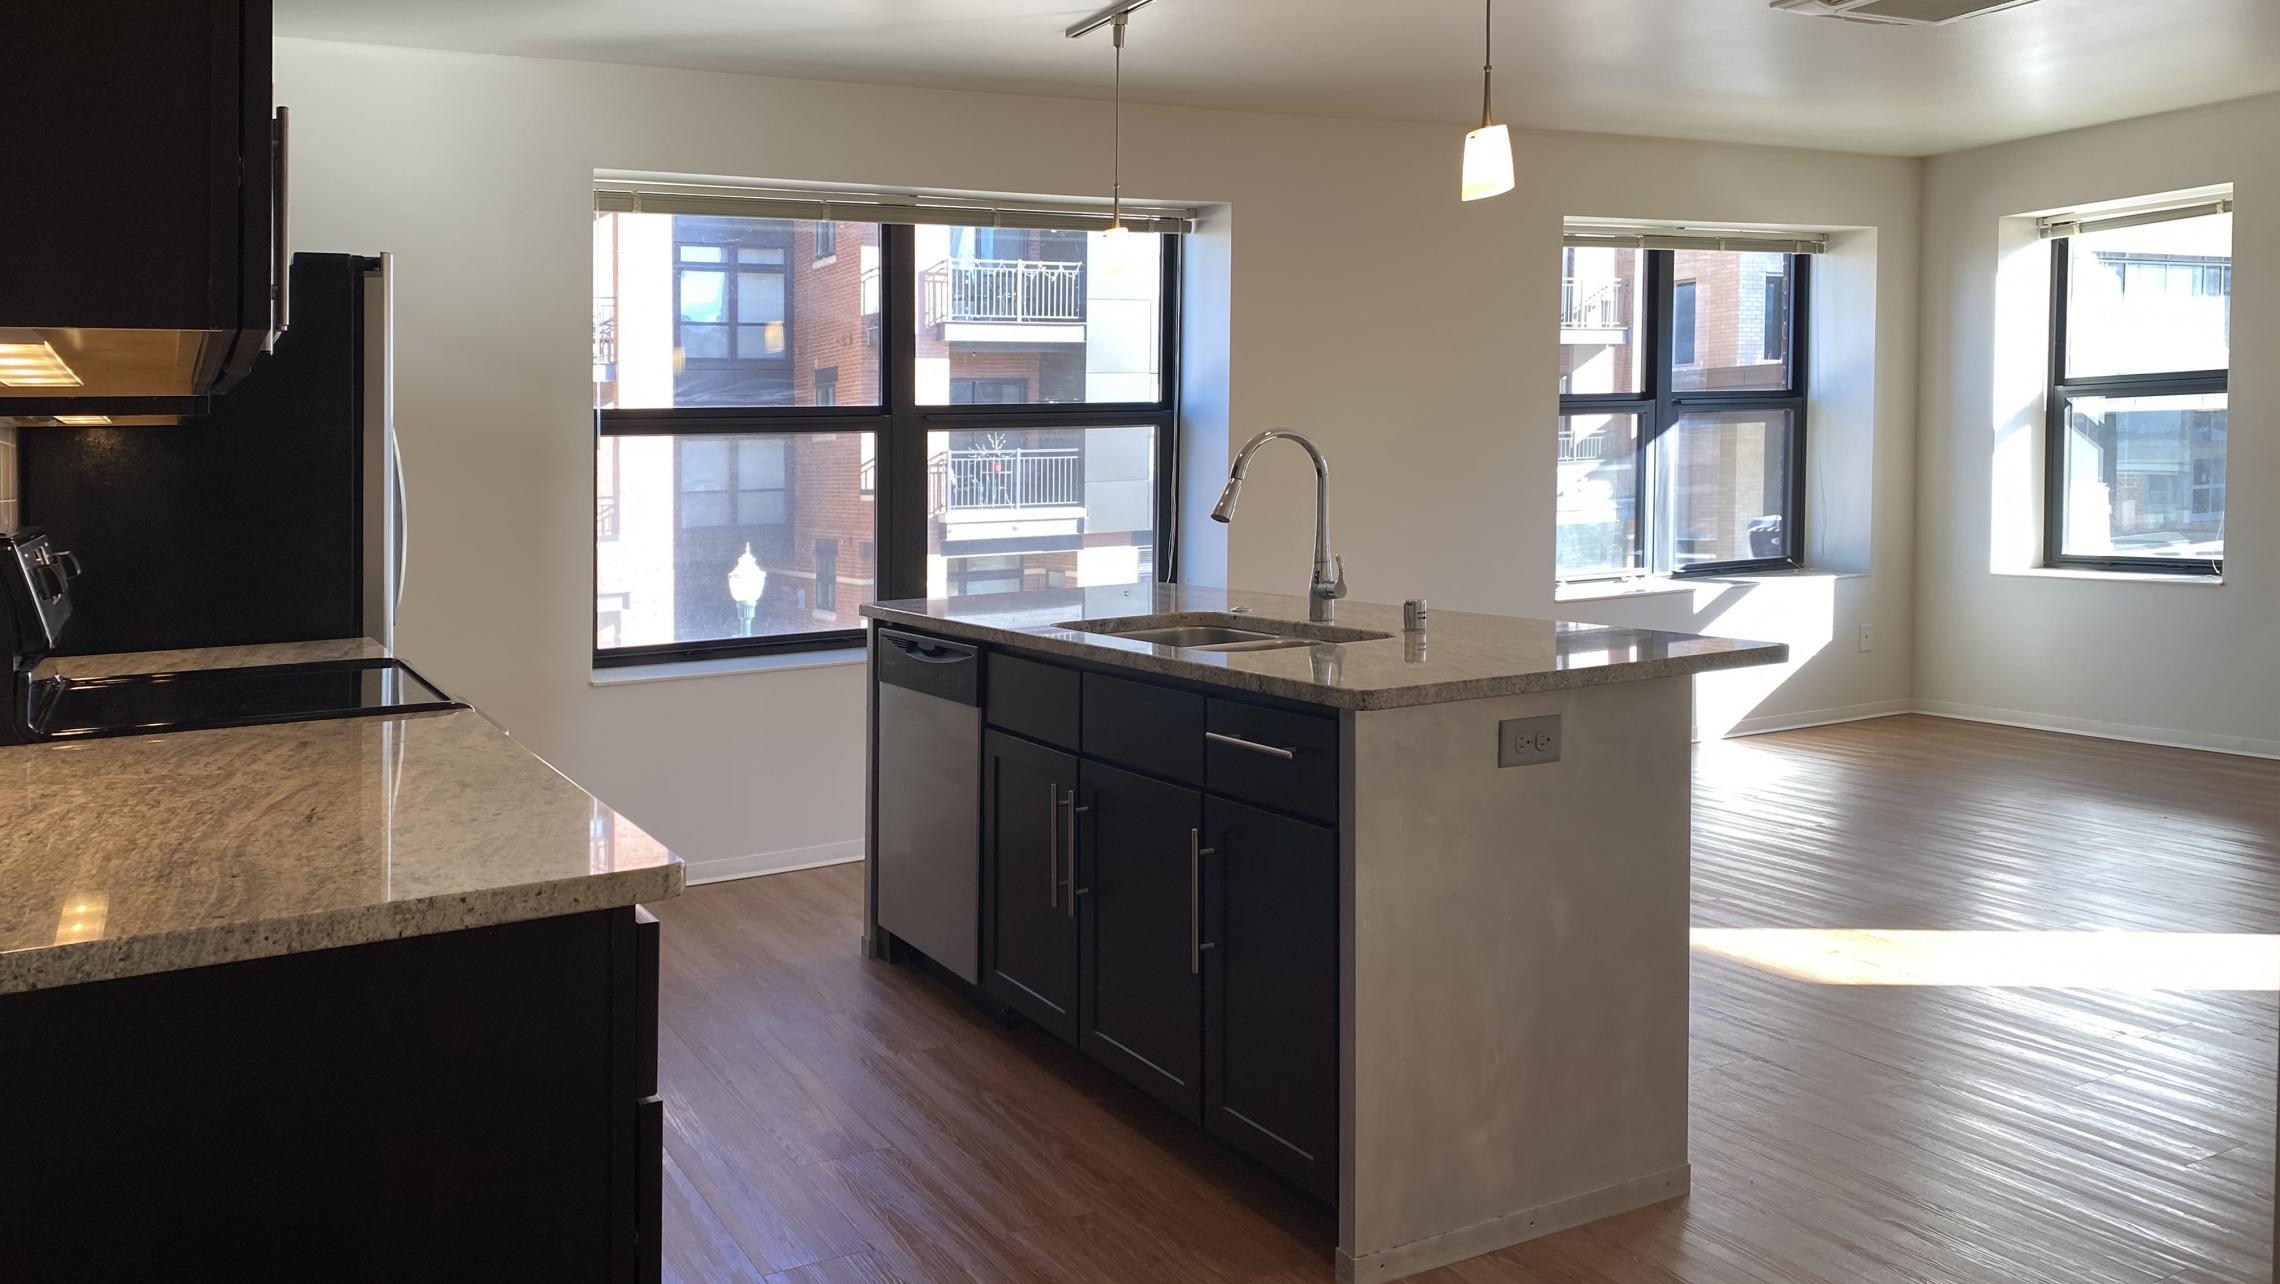 Capitol-Hill-Apartment-307-One-Bedroom-Downtown-Capitol-Lake-View-Modern-Upscale-Radiant-Heating-Kitchen-Living-Bathroom-Lifestyle-Madison-Home-Cats